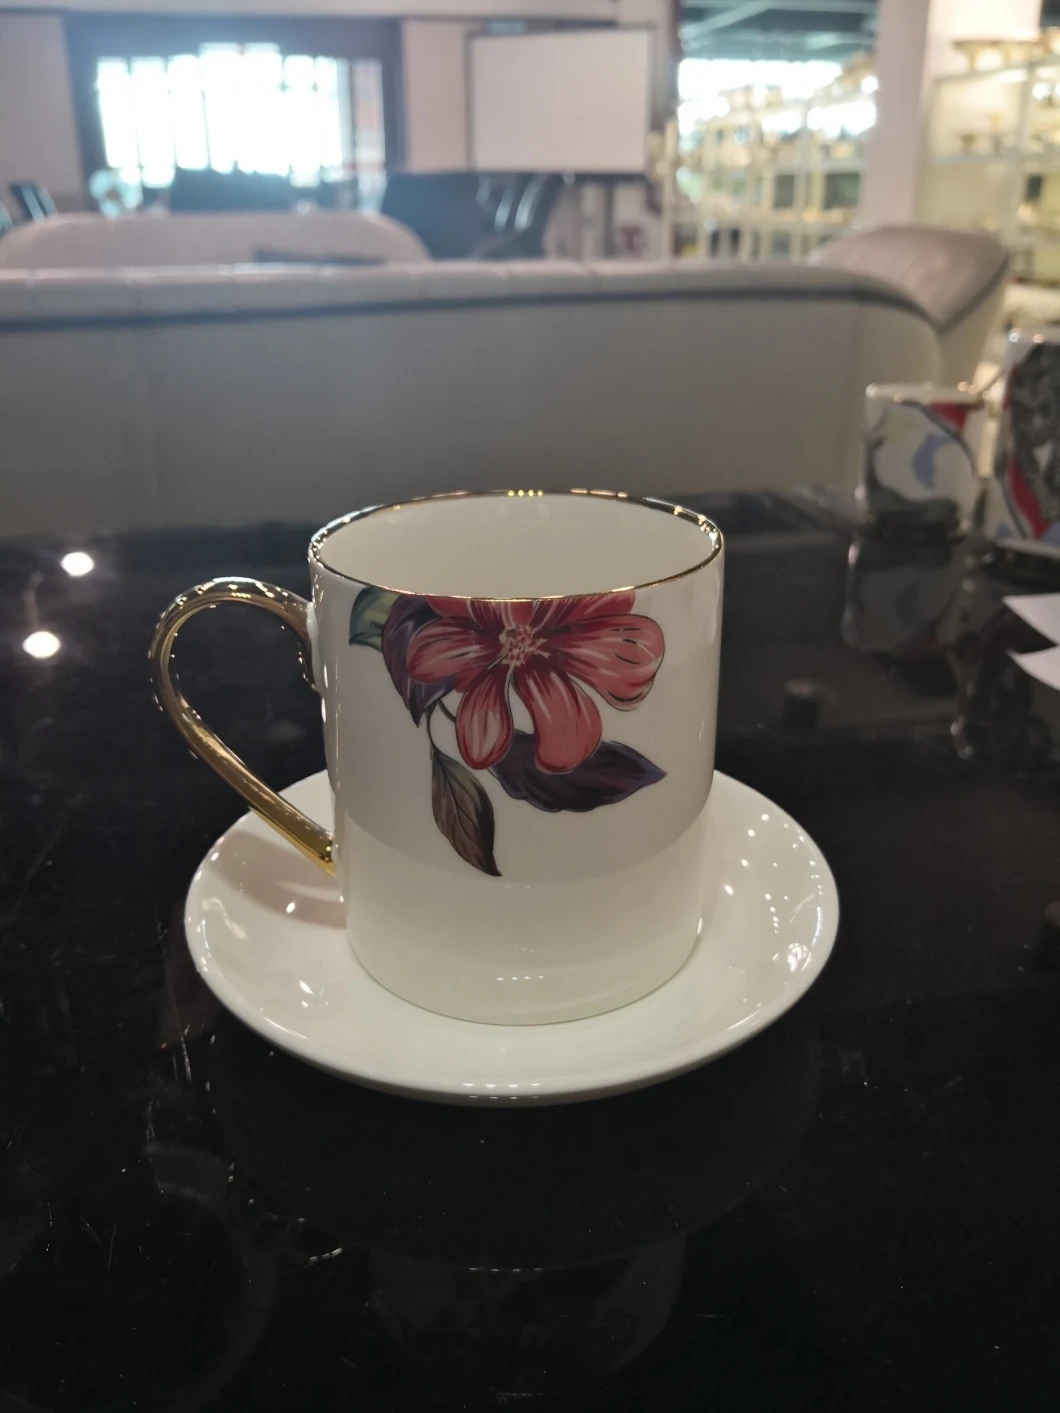 New Arrival Office Coffee Mug Flower Pattern Ceramic Saucer Cup